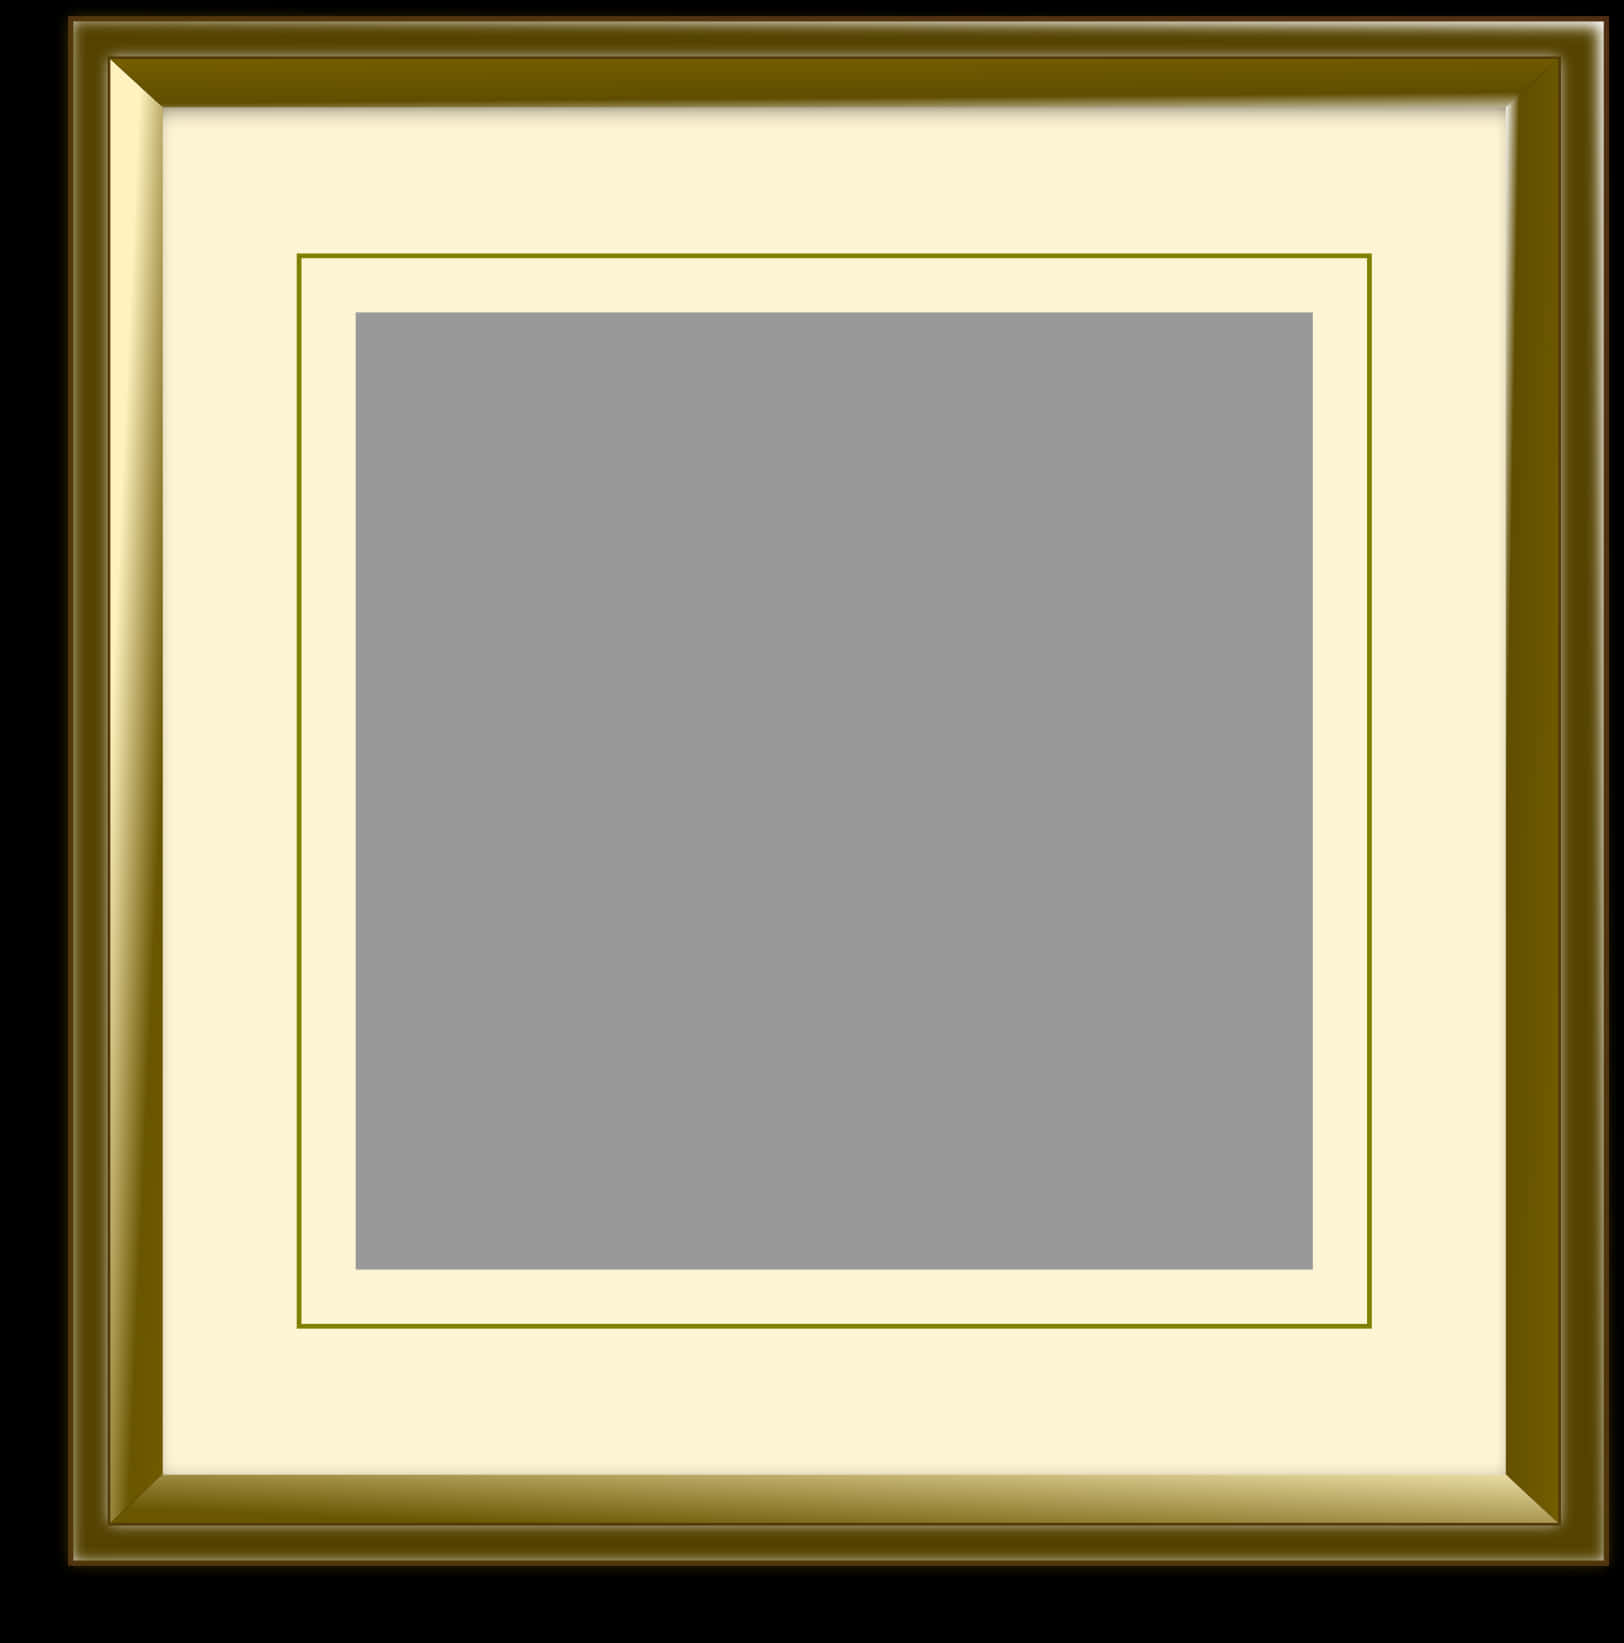 A Square Picture Frame With A White Border